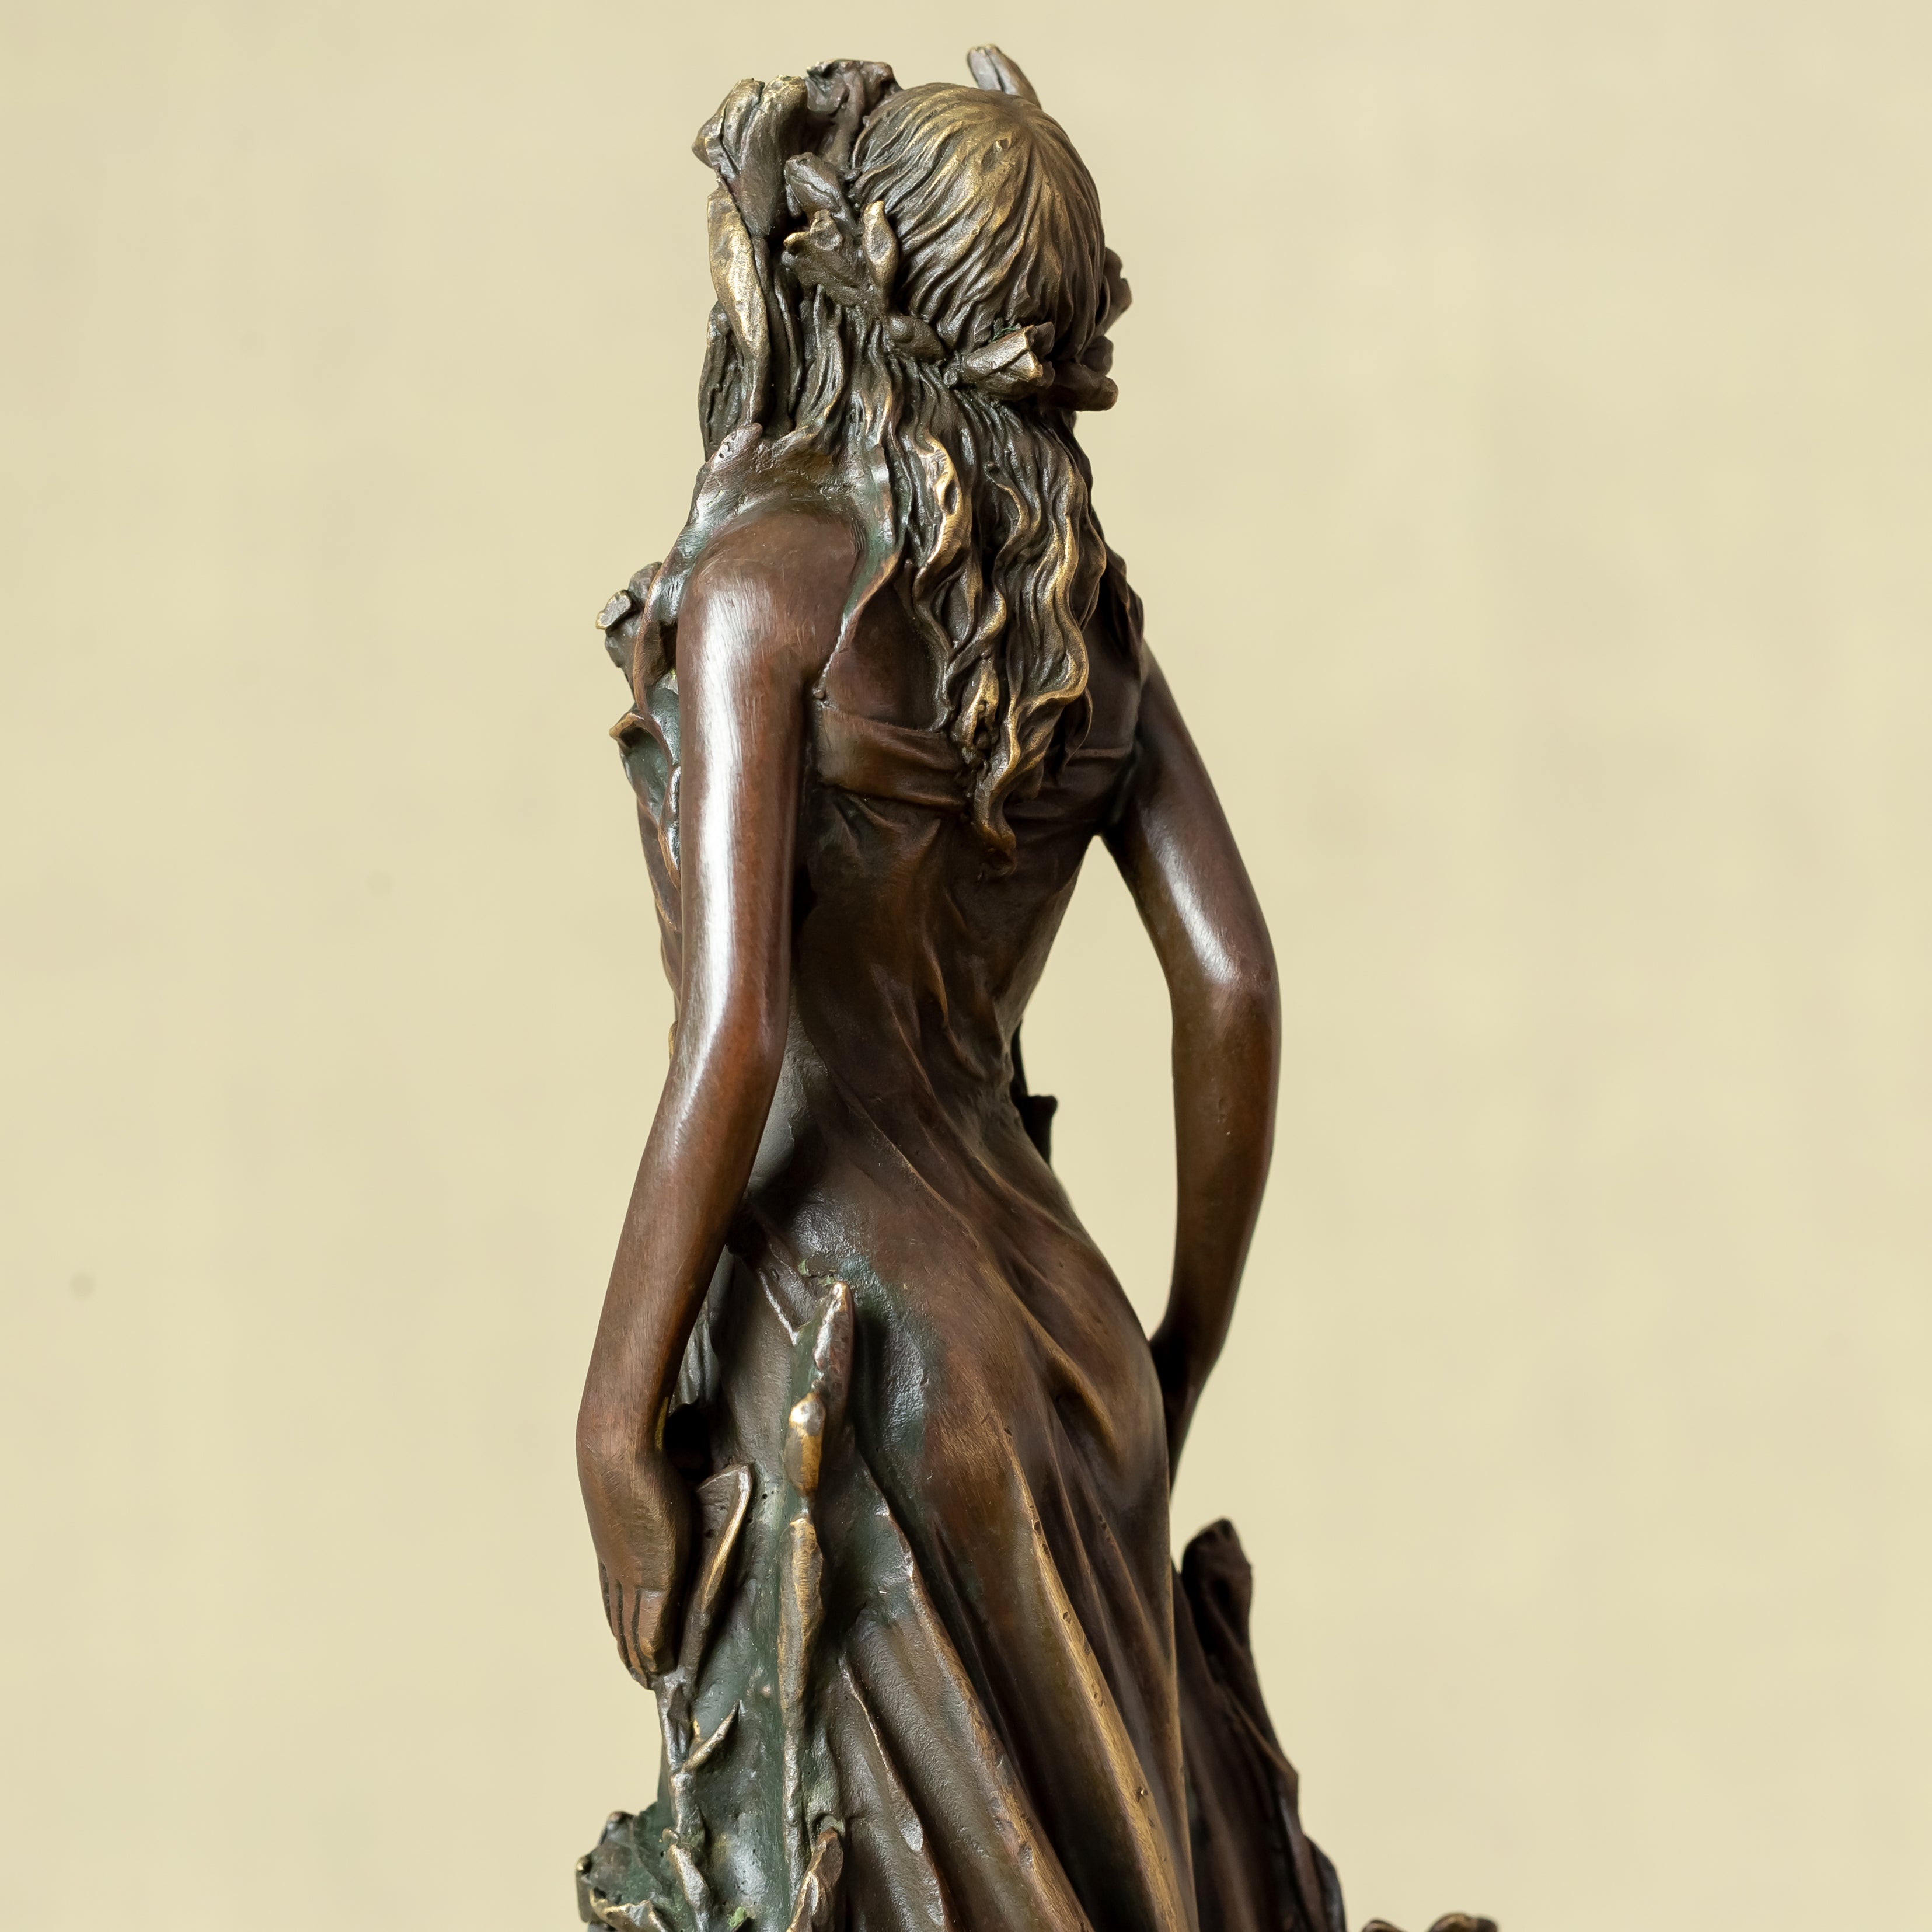 Aphrodite Bronze Statue, Greek Goddess of Love and Beauty, 11.8" Pure Bronze Casting Unique Statues and Sculptures Art Craft for Decor Gift